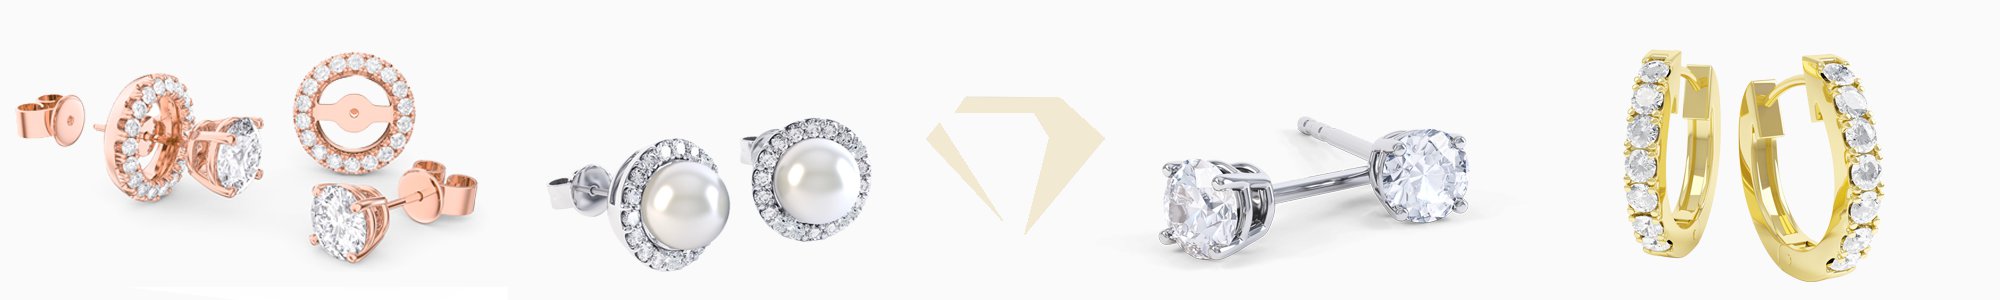 Shop Diamond Earrings by Jian London. Buy direct and save from our wide selection of Diamond Earrings at the Jian London jewelry Store. Free US Delivery